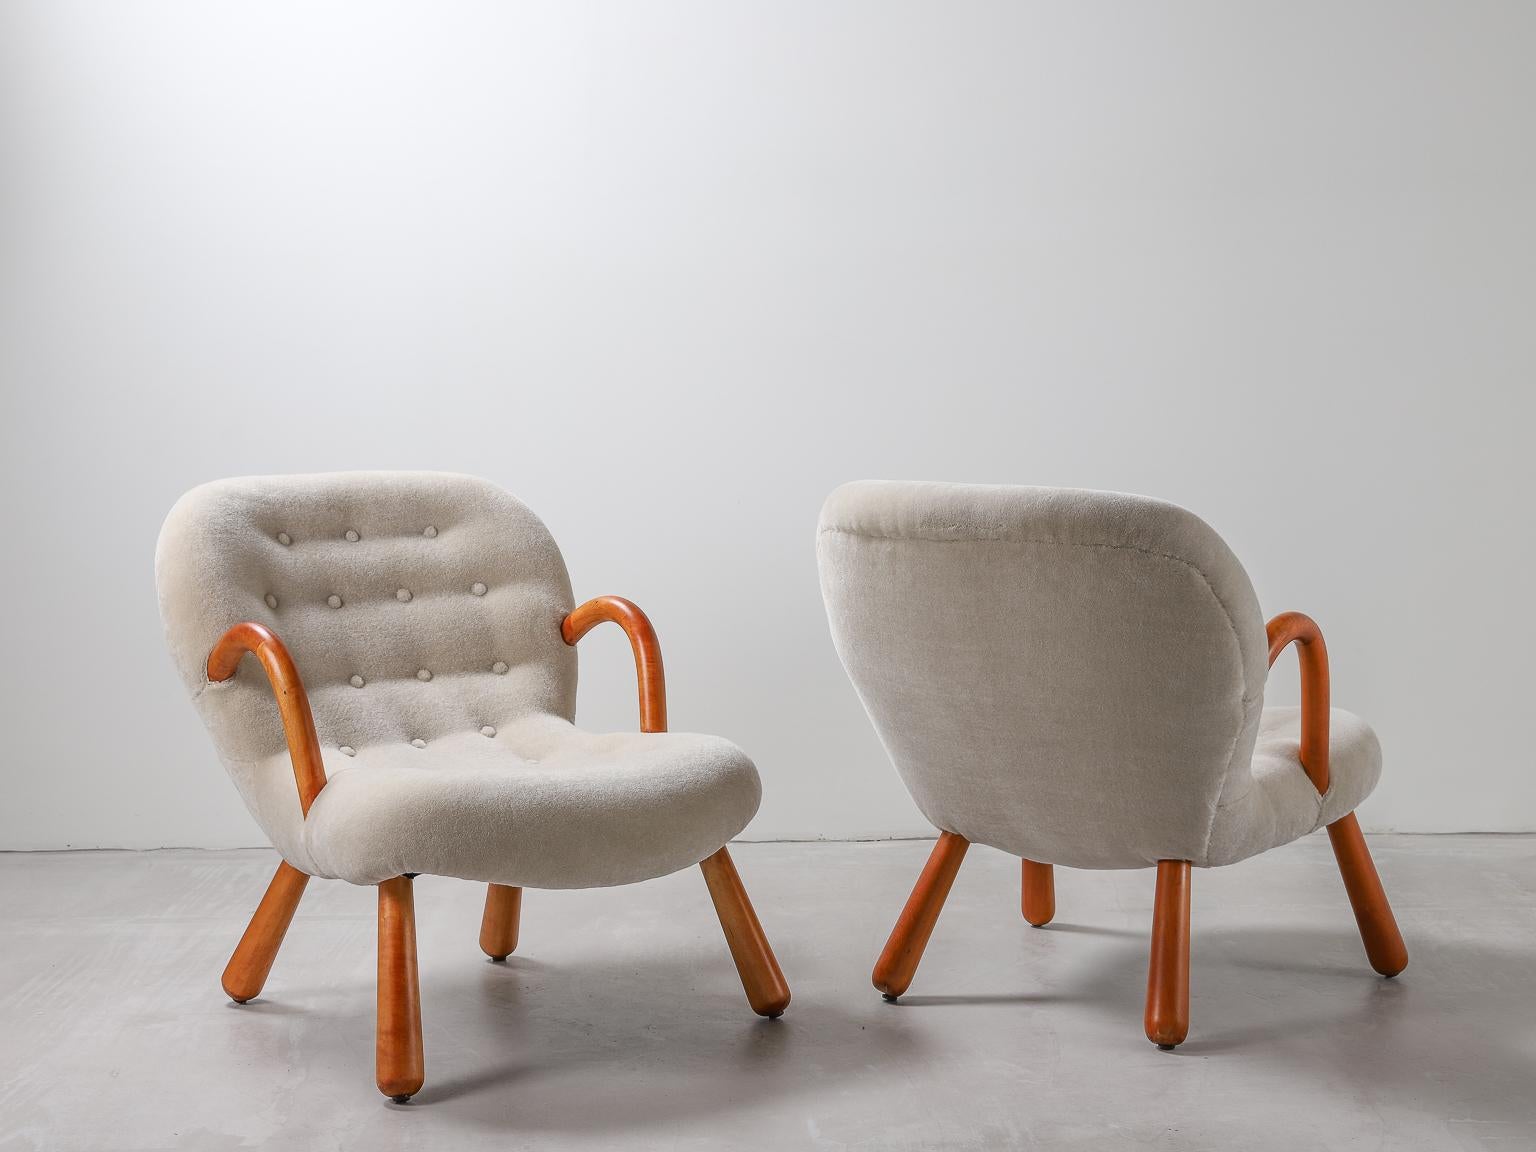 A pair of original 'clam' (Muslinge-stolen) armchairs designed by Philip Arctander, newly re-upholstered in bespoke mohair velvet fabric. The beech Lightly restored Beech wood bearing patina. 

Danish architect Philip Arctander (1916-1994) who's